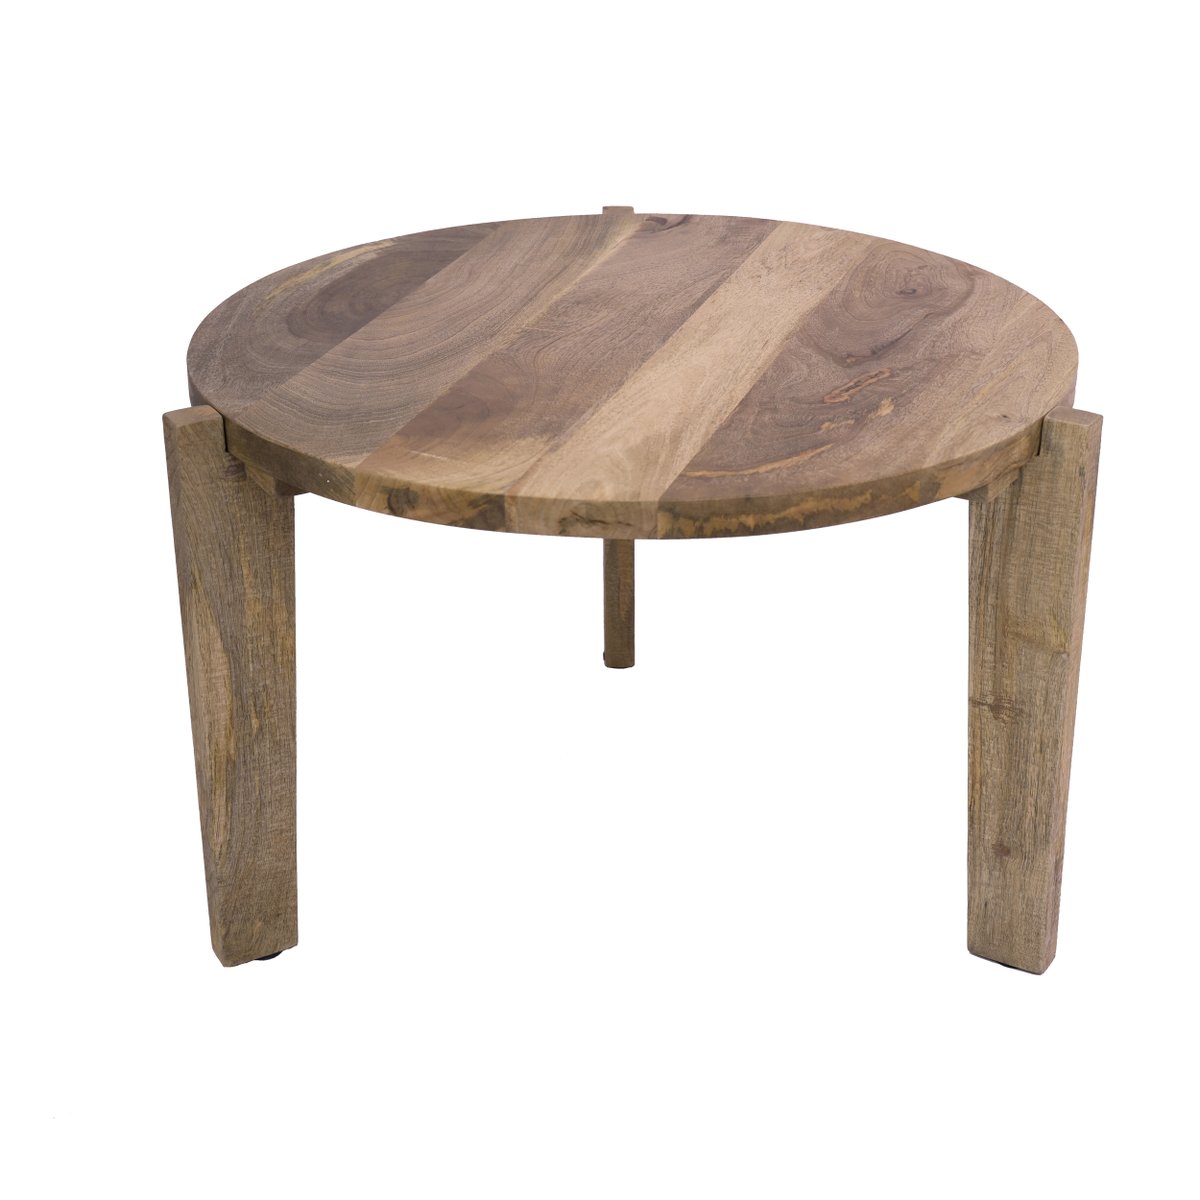 A simple coffee table with a natural finish handcrafted in the shape of a circle and made up of the best natural wood. 
To Know more: bit.ly/3LYK3a5
.
#coffeetable #wholesaleprice #handcraftedtable #naturalfinish #madhursfurniture #handcraftedcoffeetable